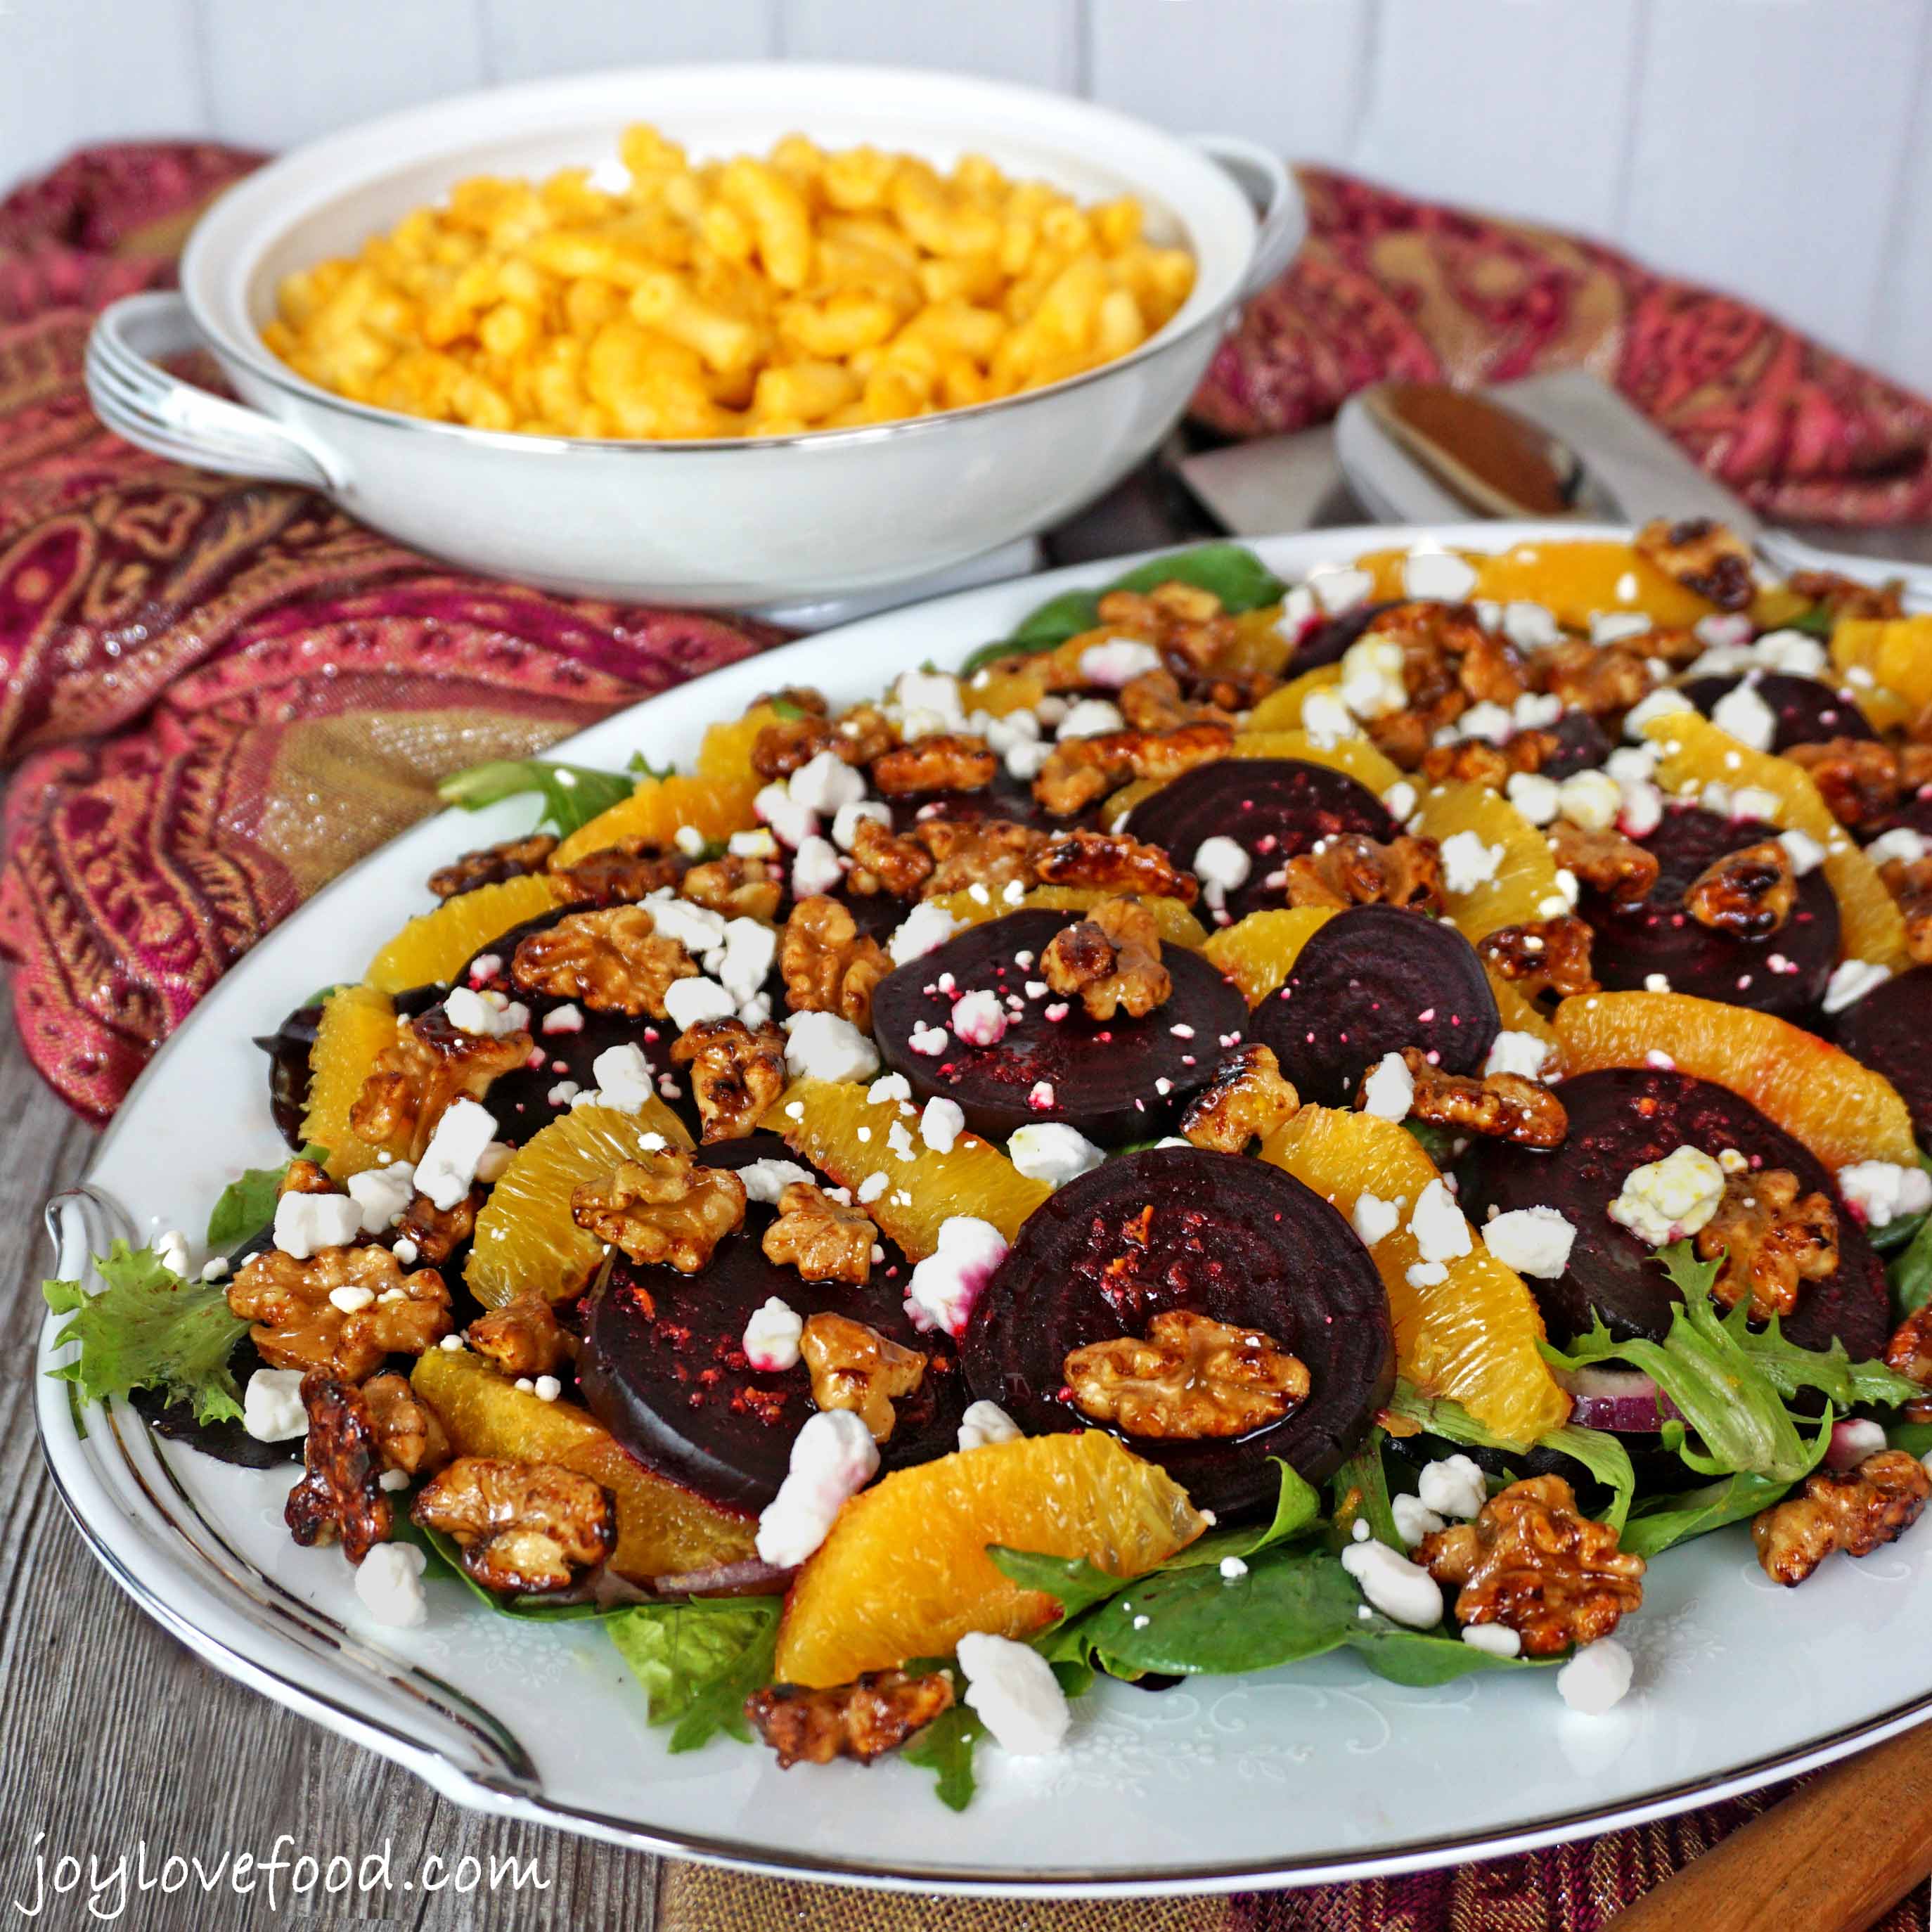 Roasted Beet Salad with Oranges, Goat Cheese and Candied Walnuts